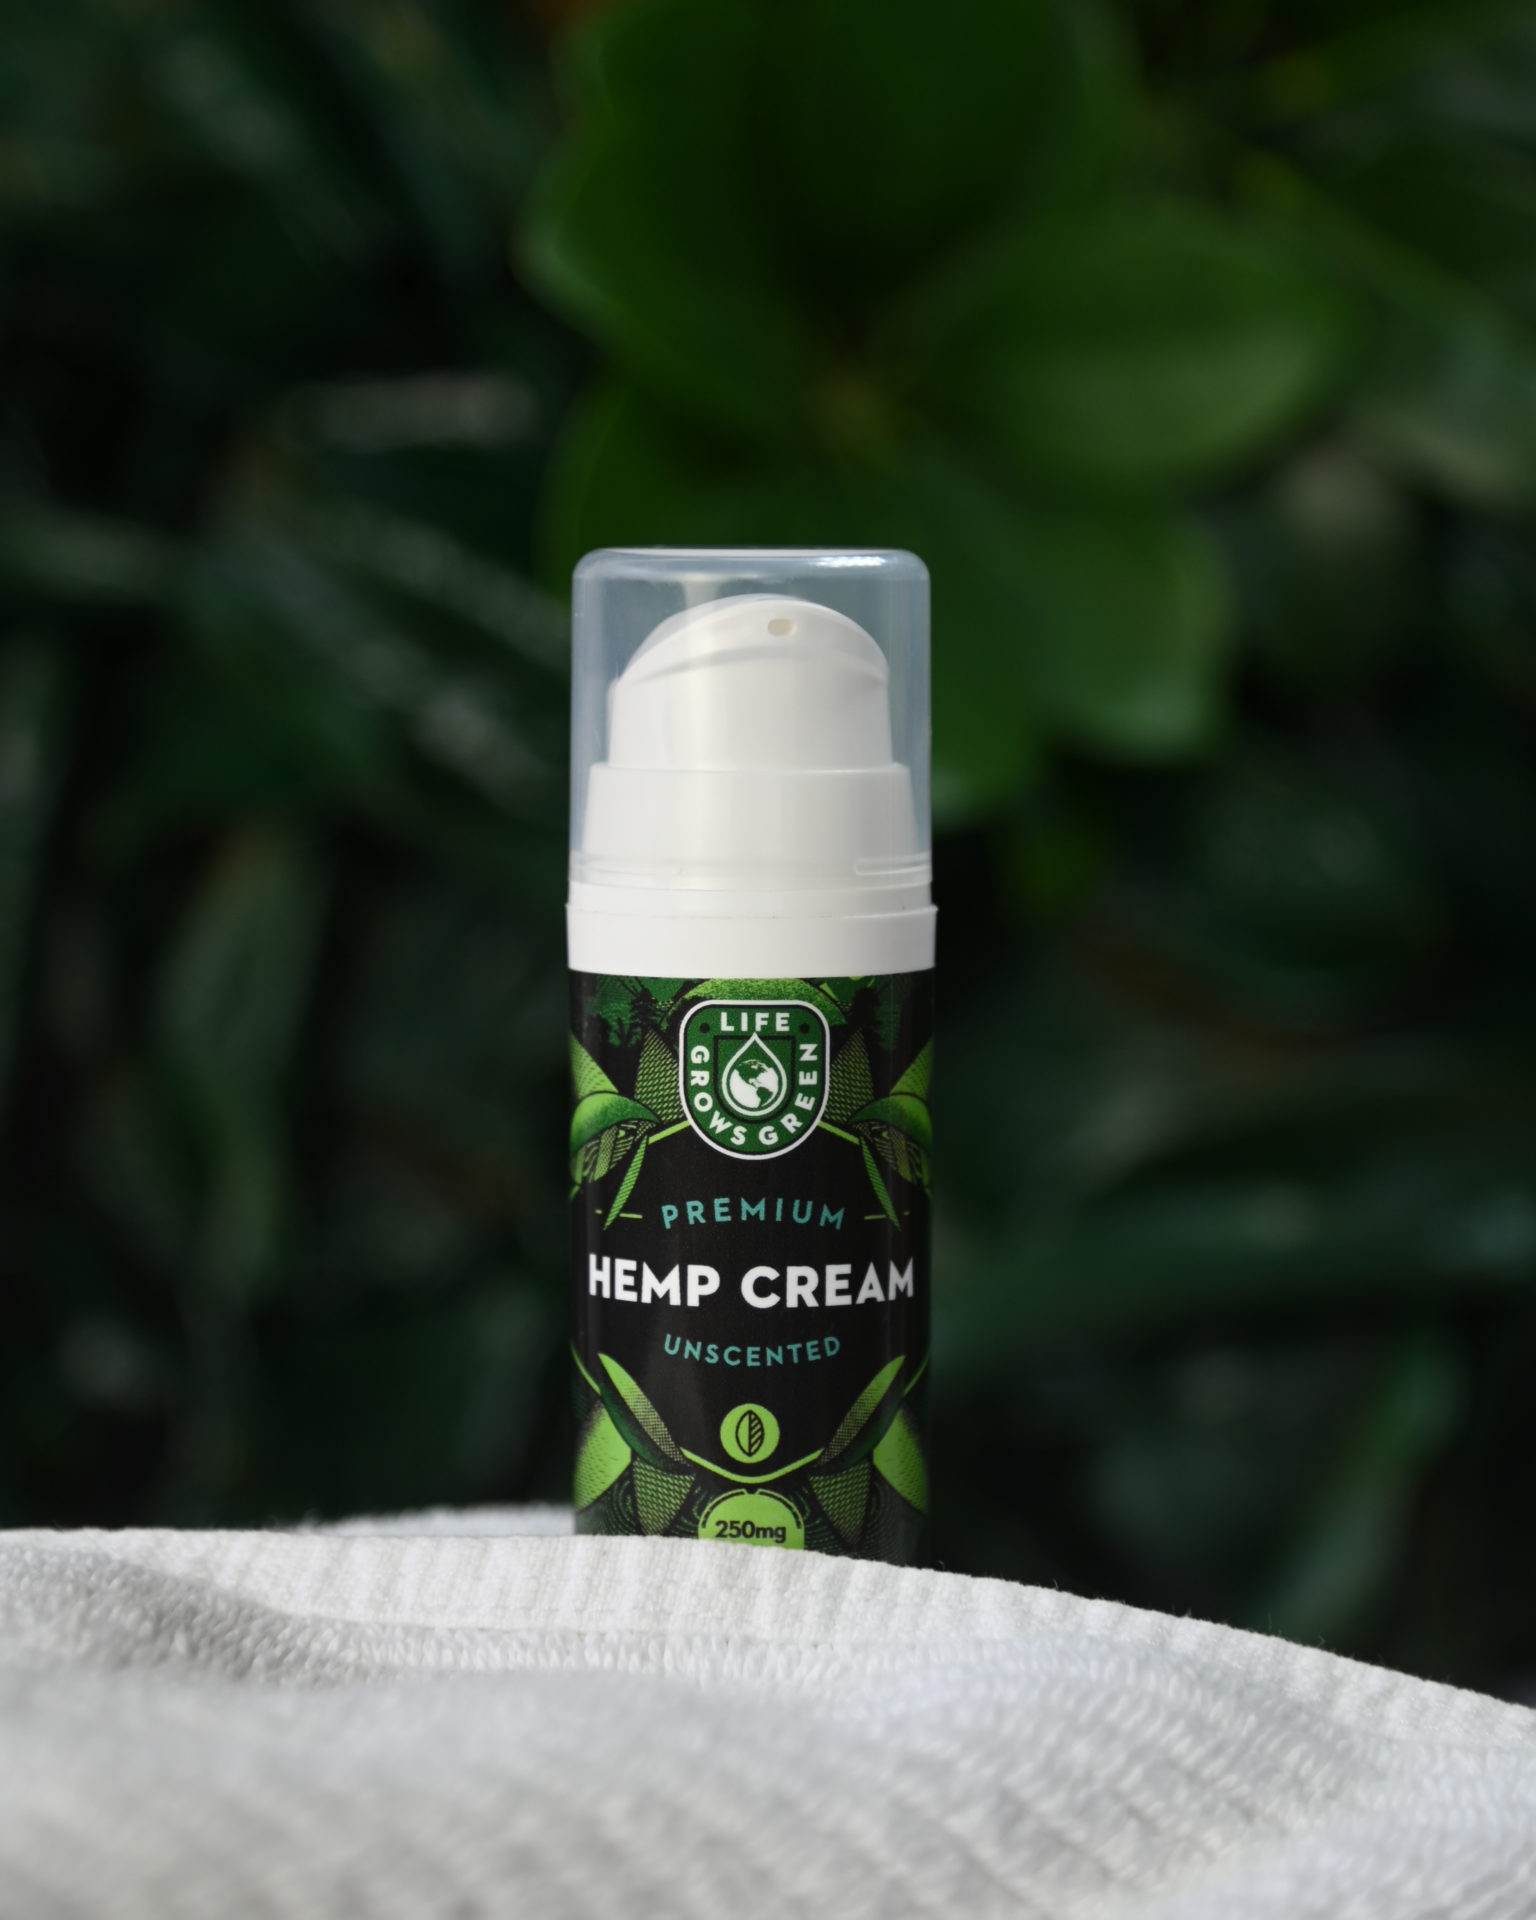 A bottle of hemp cream with a white towel in front of a green leafy background.